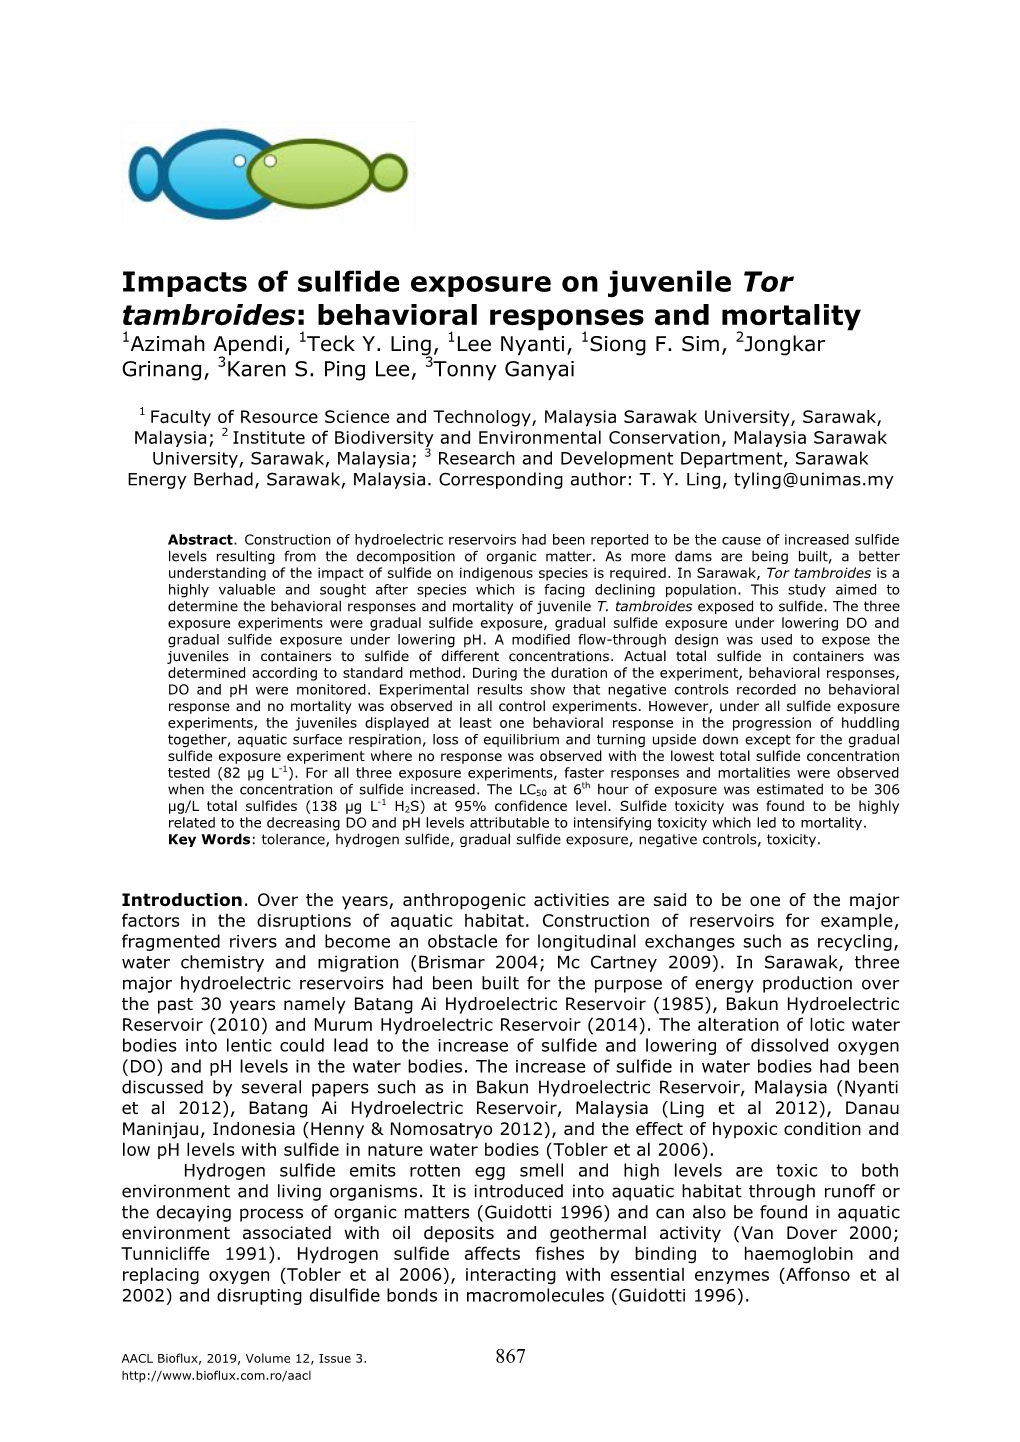 Impacts of Sulfide Exposure on Juvenile Tor Tambroides: Behavioral Responses and Mortality 1Azimah Apendi, 1Teck Y